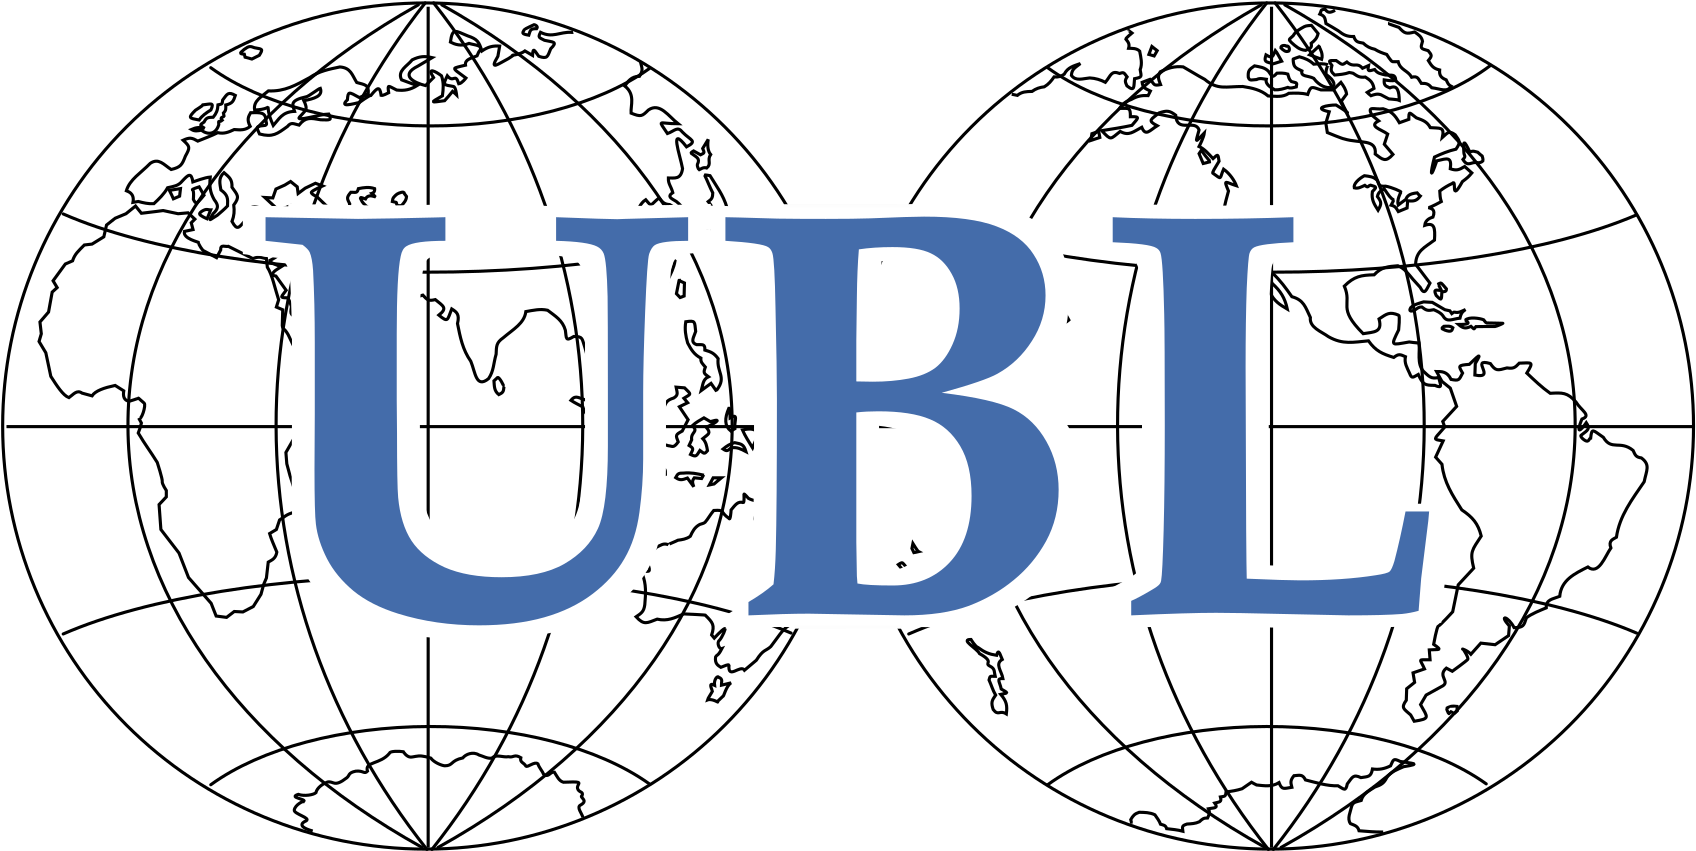 A Logo With Blue Letters And Globes